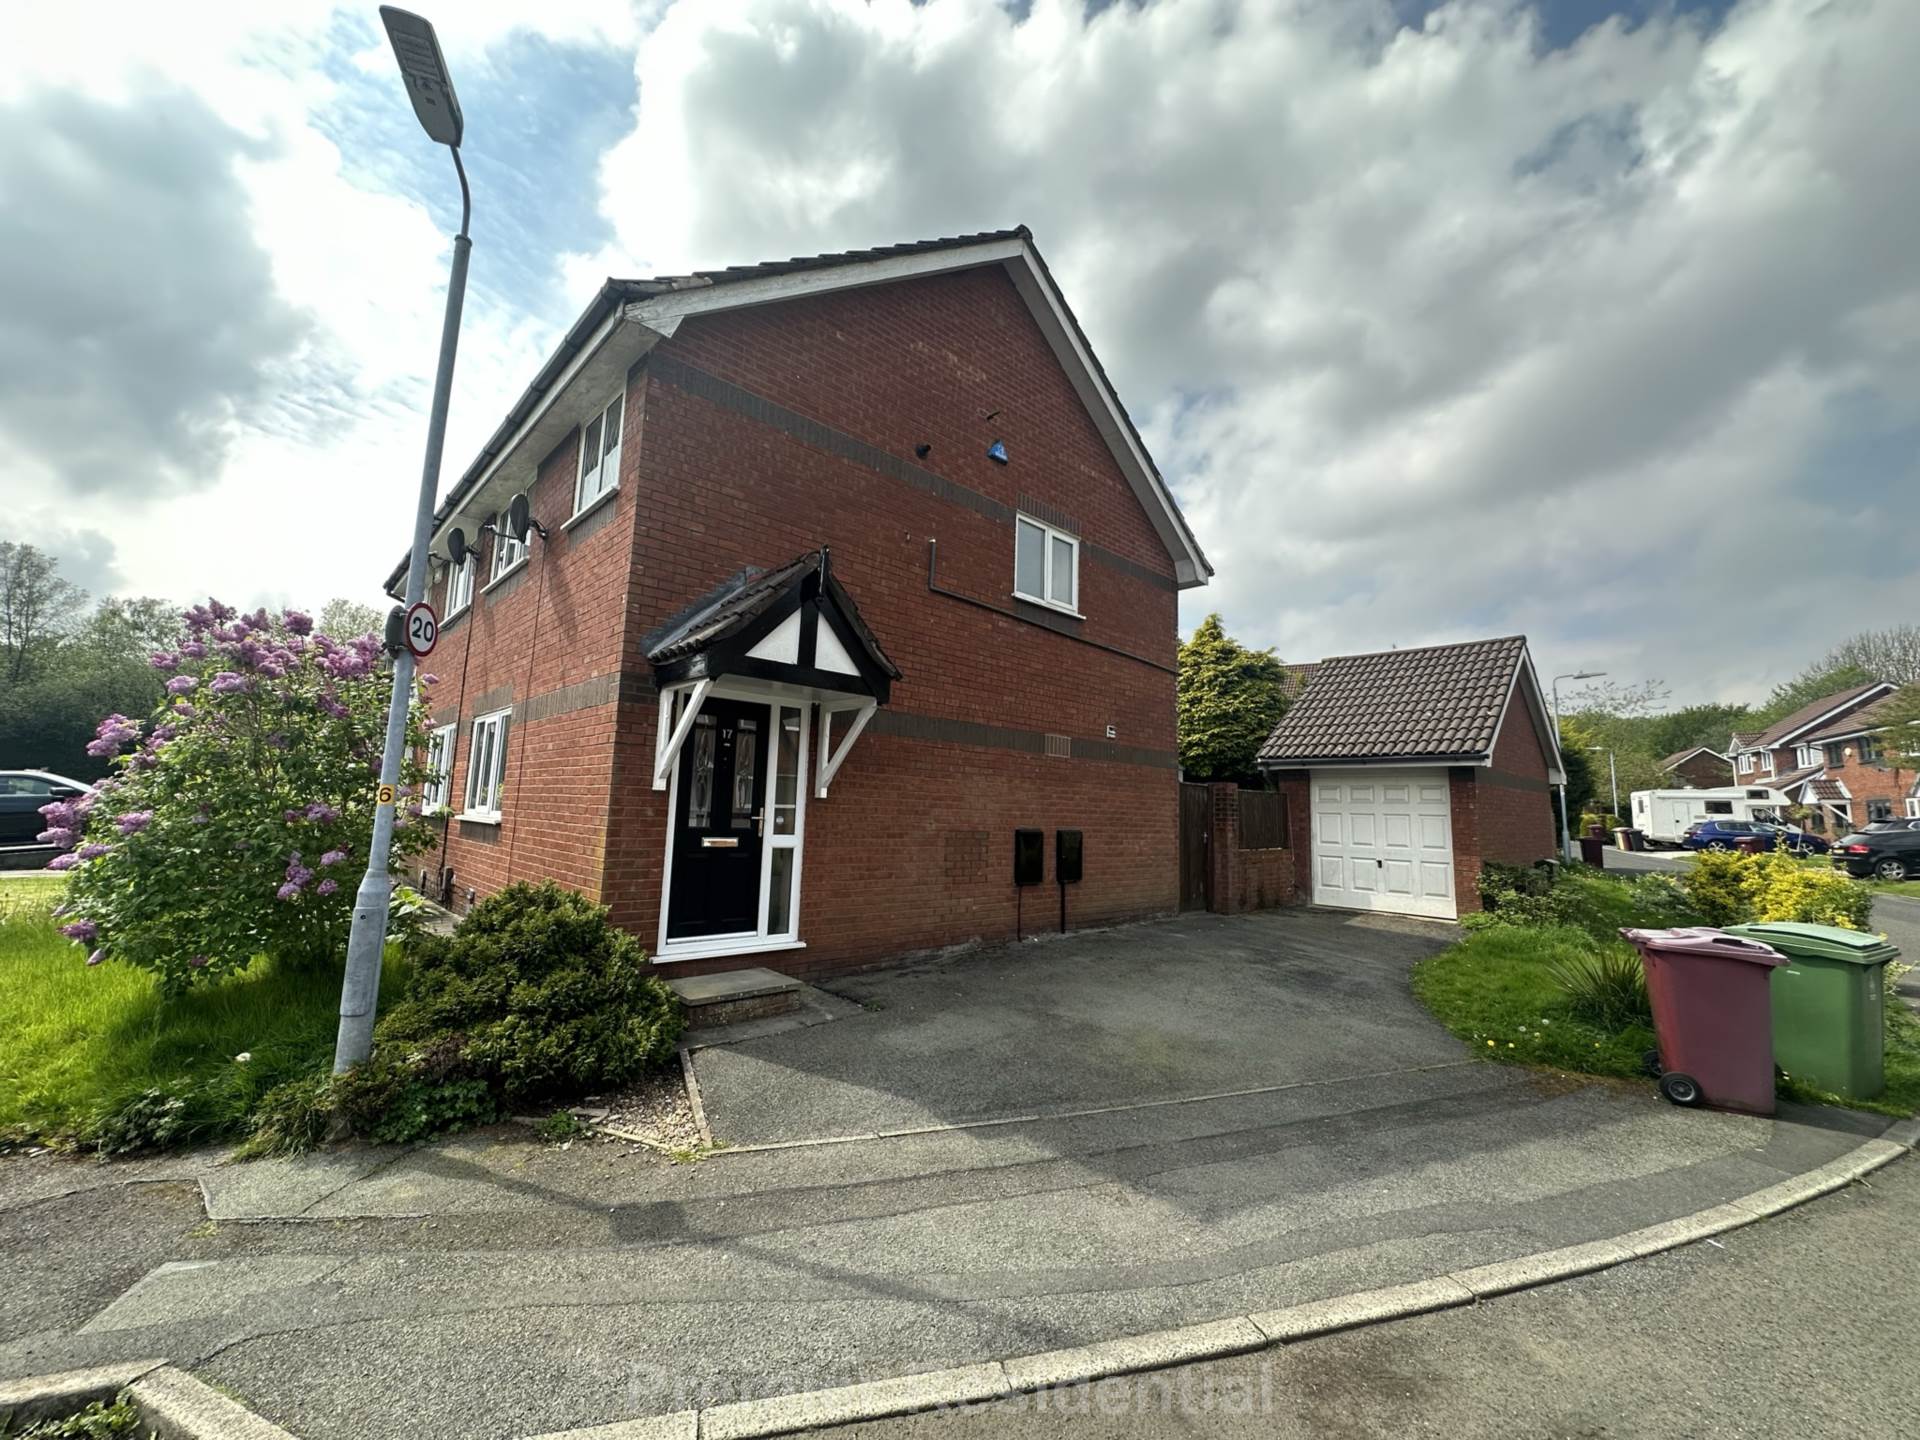 3 bed Semi-Detached House for rent in Bolton. From Premier Residential Lettings